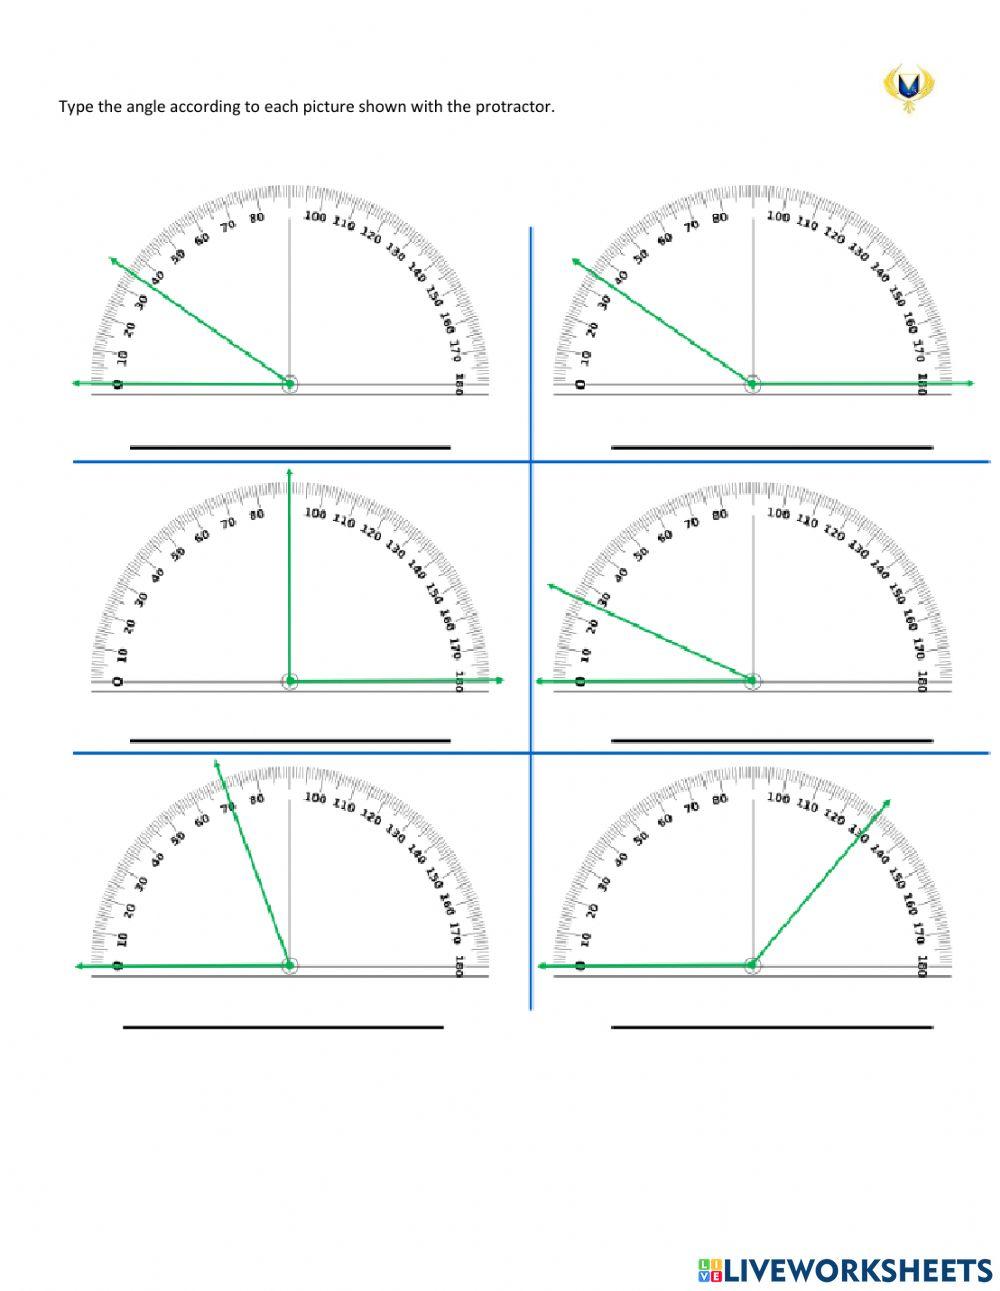 Angles and Measures